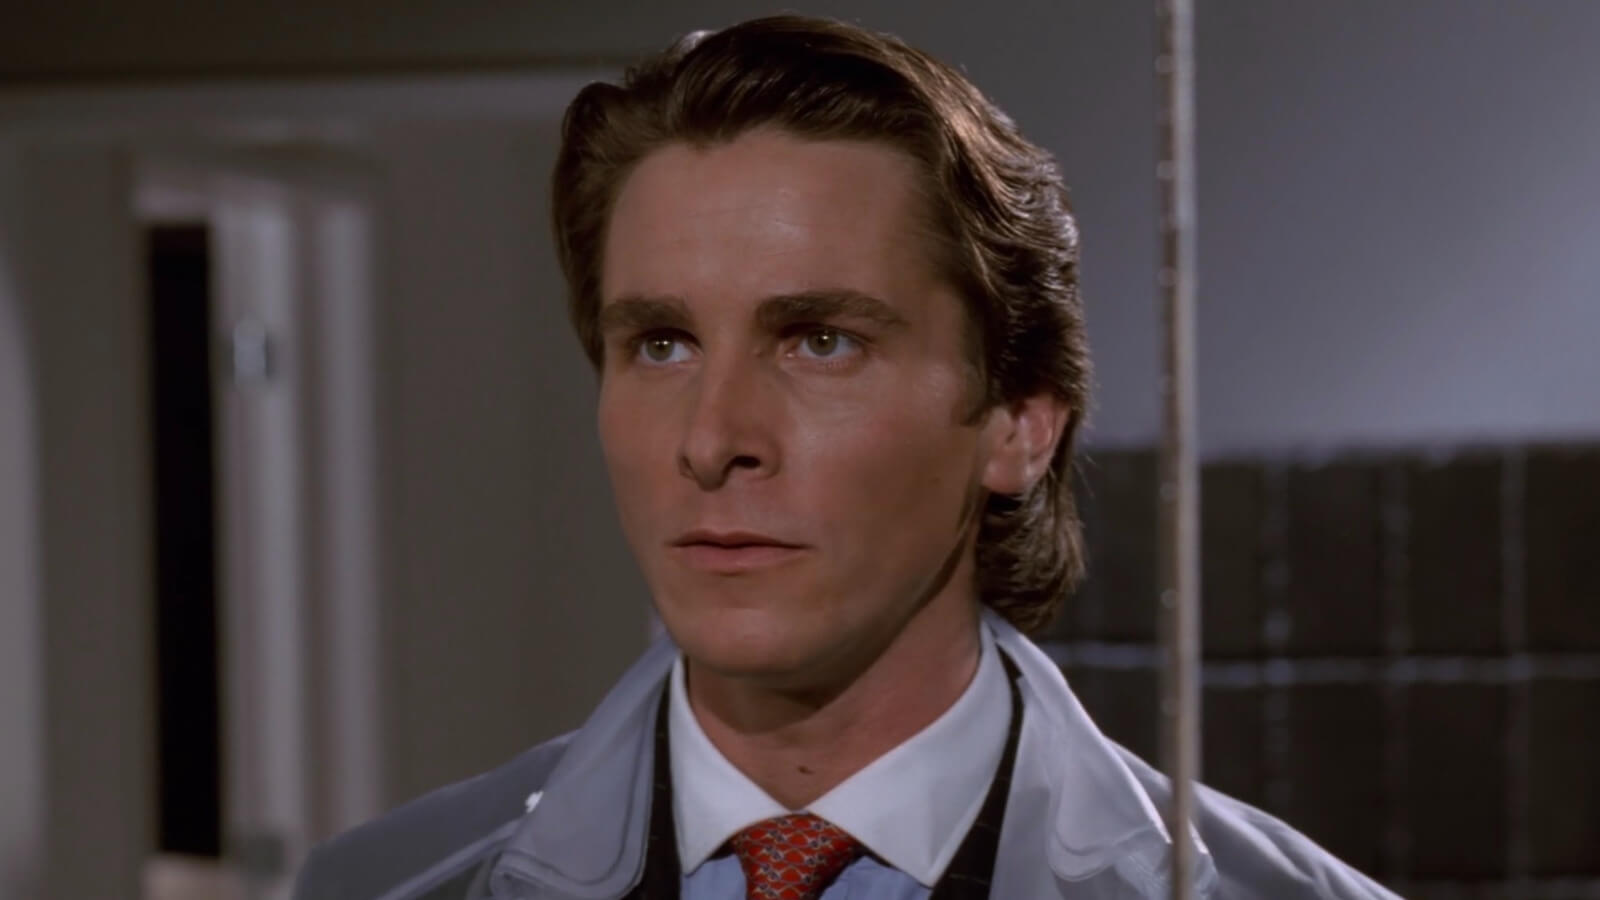 A picture of Patrick Bateman from American Psycho